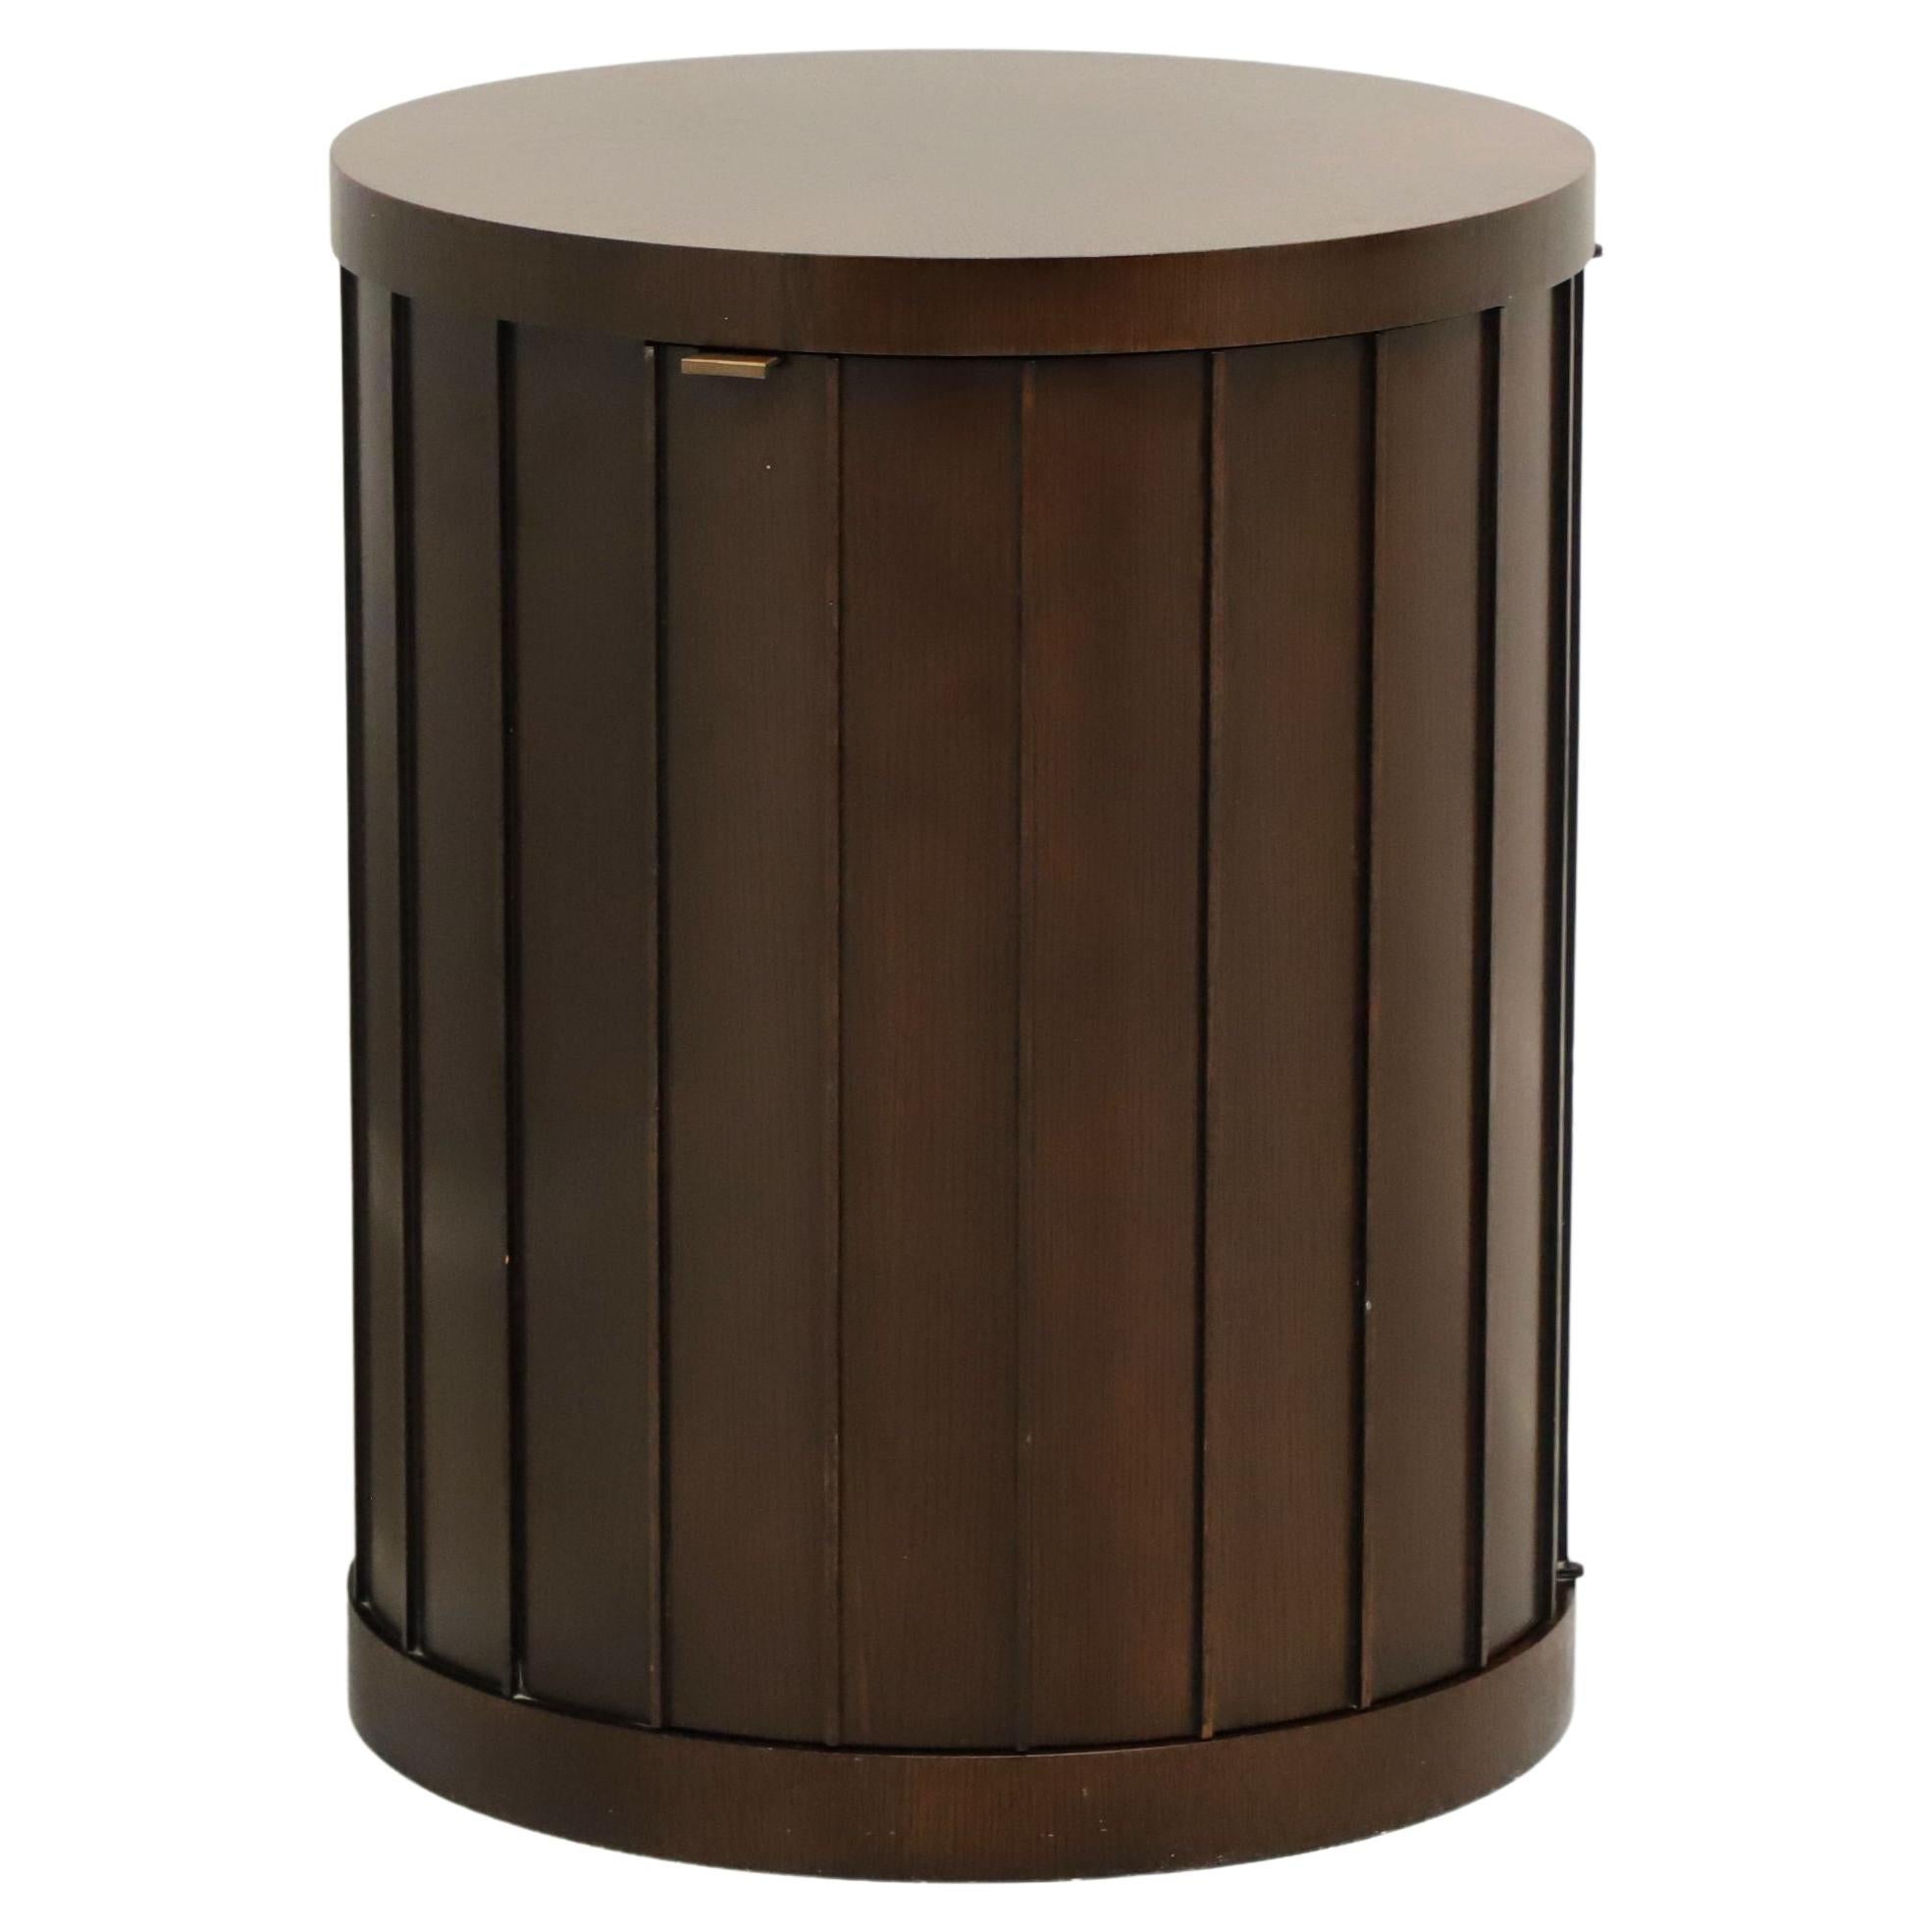 Barbara Barry for Baker Contemporary Mahogany Round Cabinet Accent Table